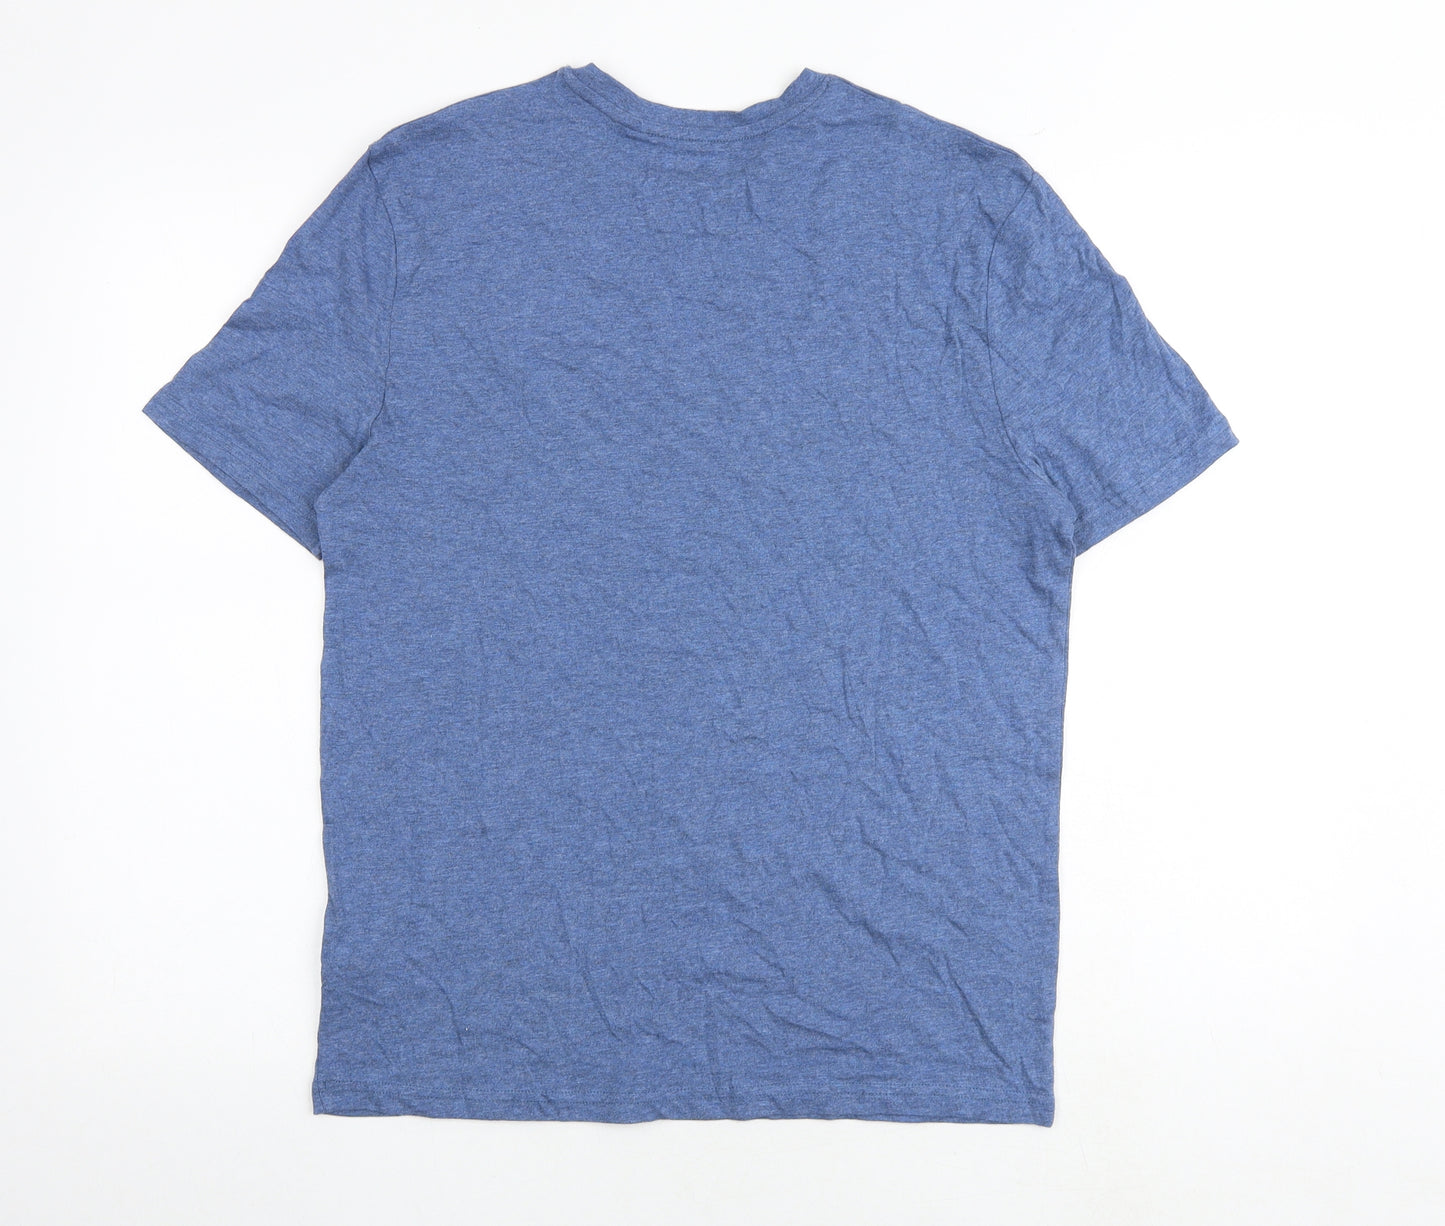 Marks and Spencer Mens Blue Cotton T-Shirt Size S Round Neck